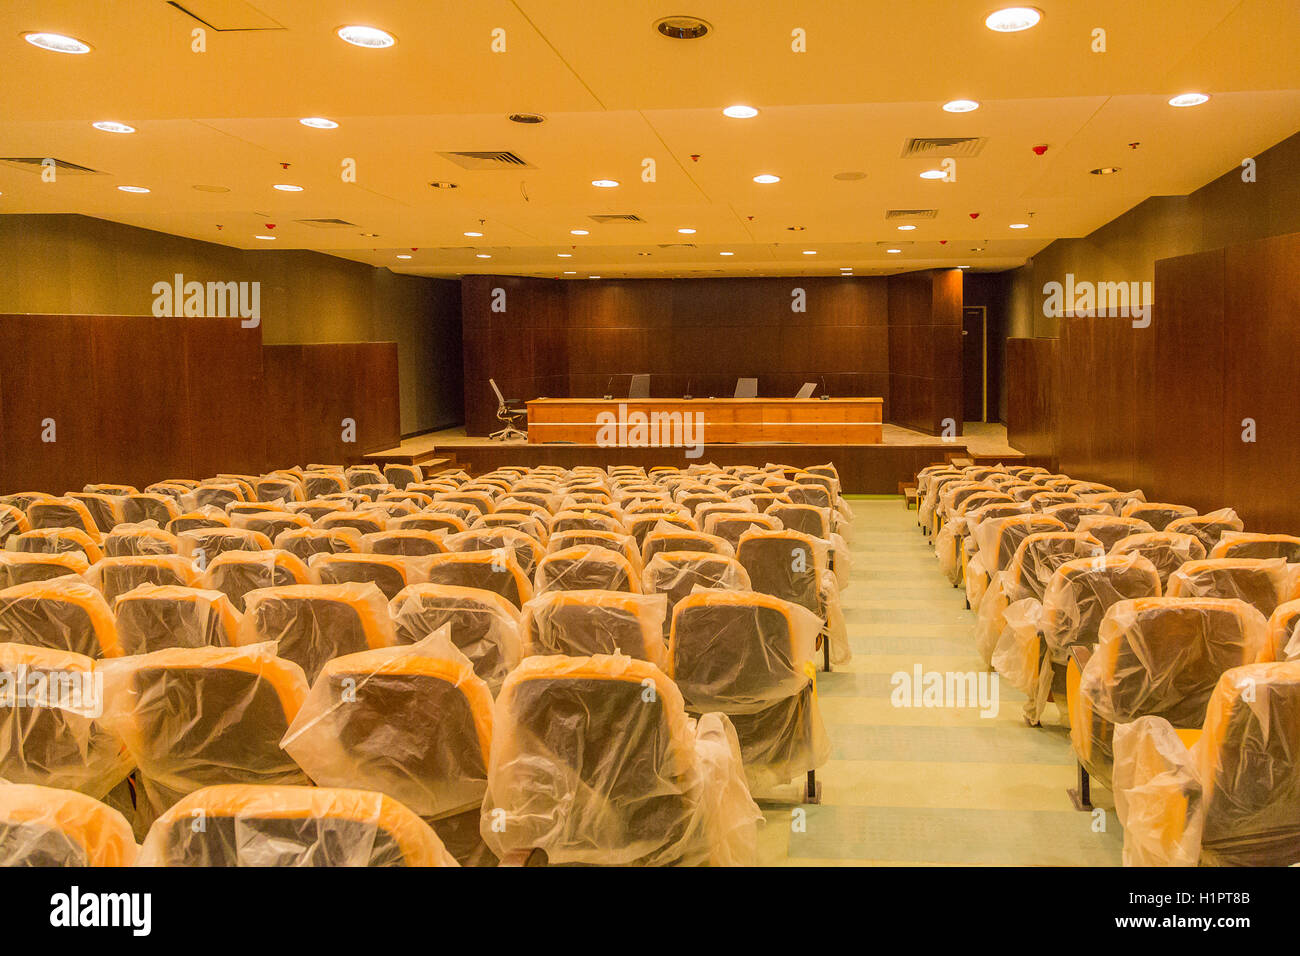 Egypt, Cairo, the National Museum of Egyptian Civilization, not yet inaugurated, in December 2015 : The conference room. Stock Photo